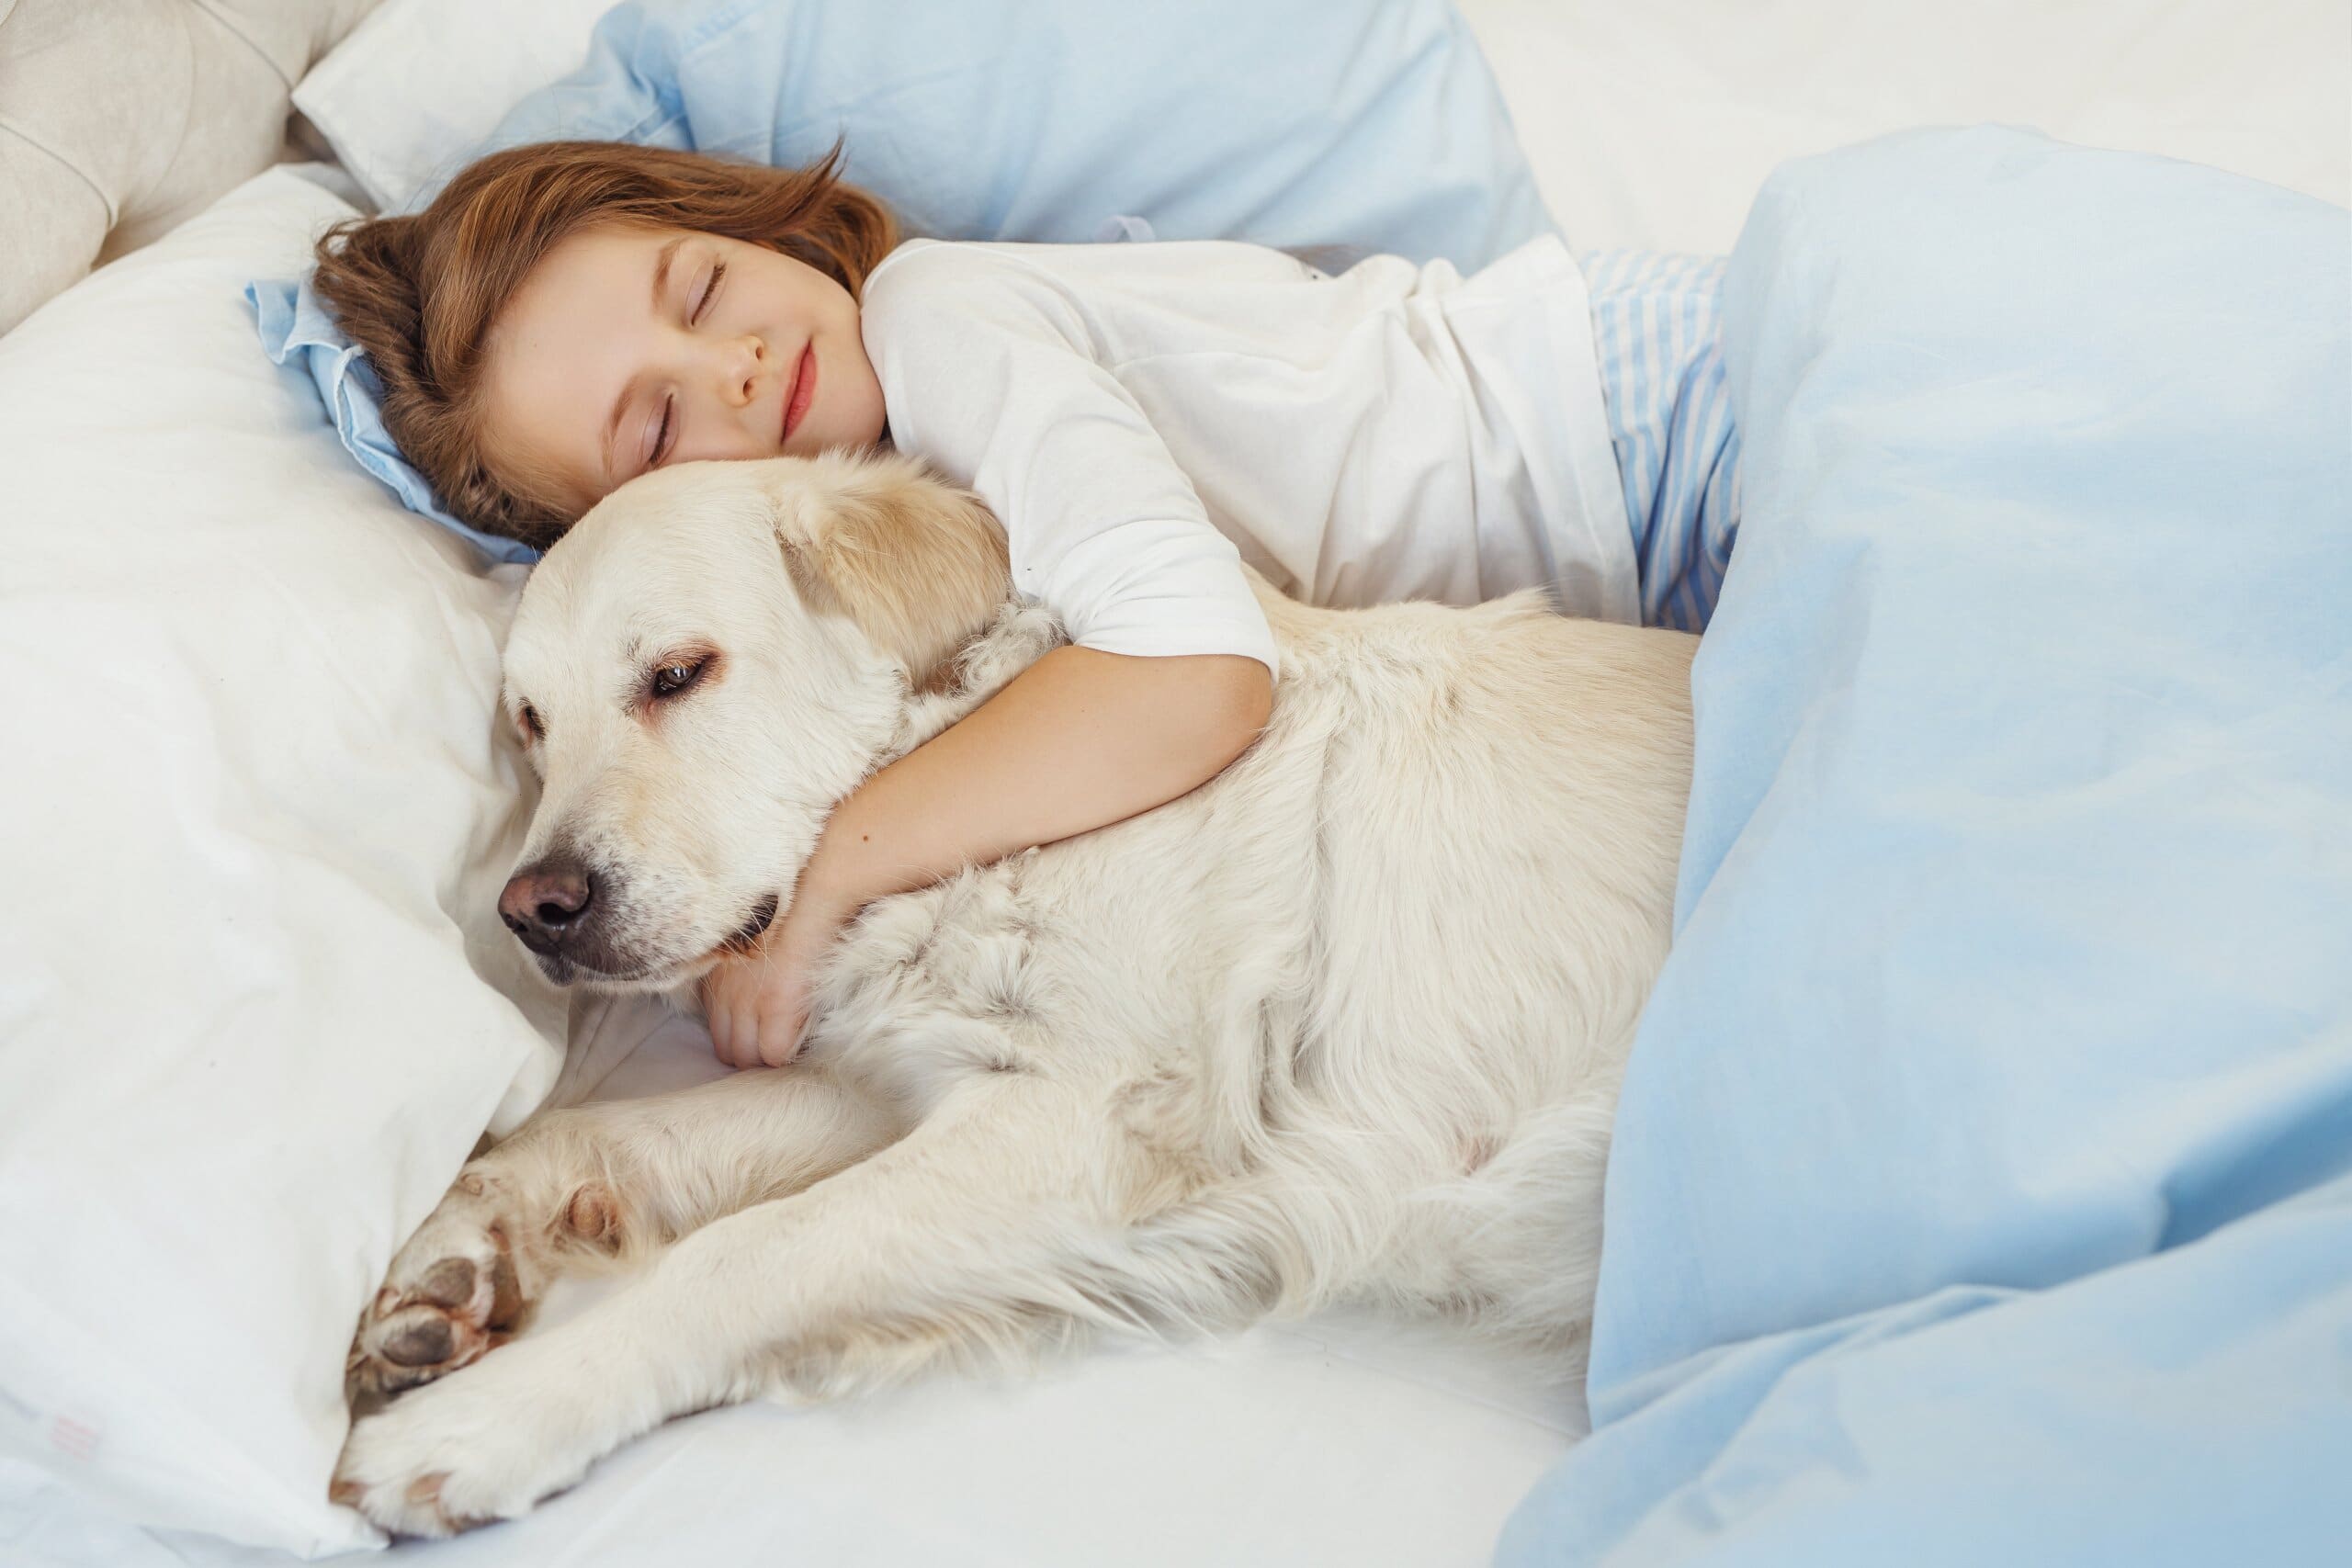 Child smiling with eyes closed cuddling a golden retriever in bed.